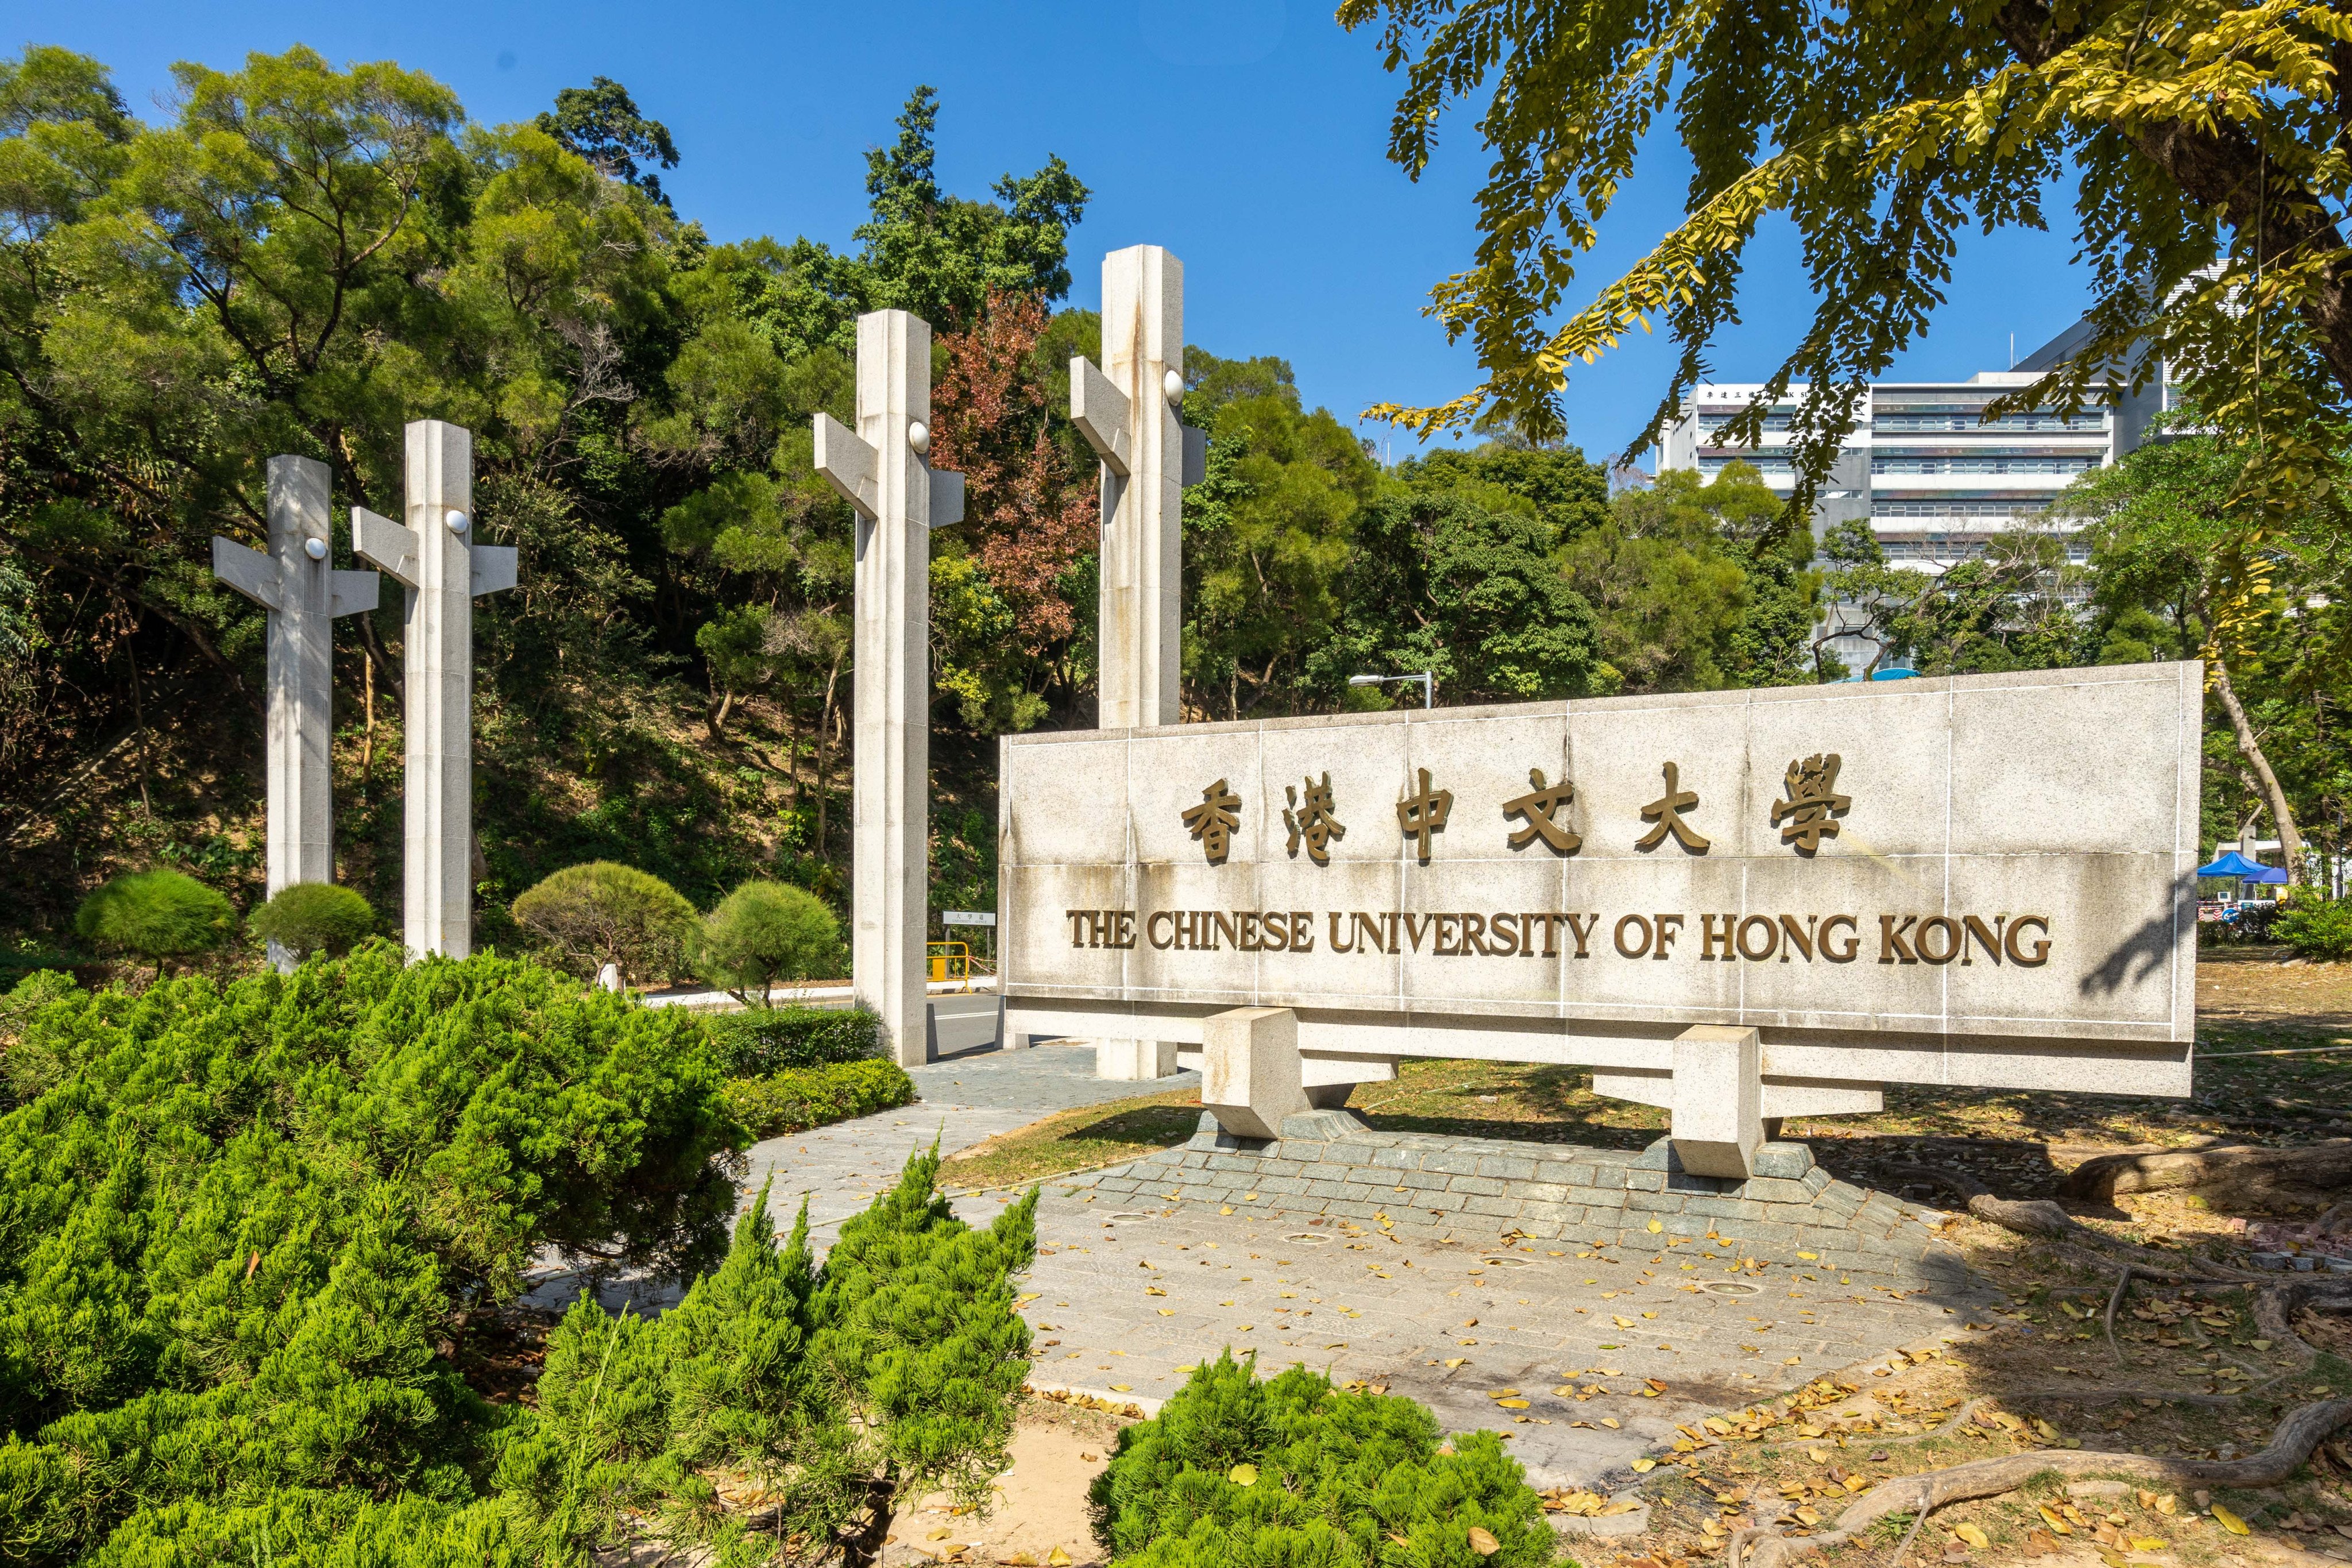 A petition backing a counter-proposal to reform CUHK’s council has been launched in response to a controversial proposal by lawmakers. Photo: Shutterstock